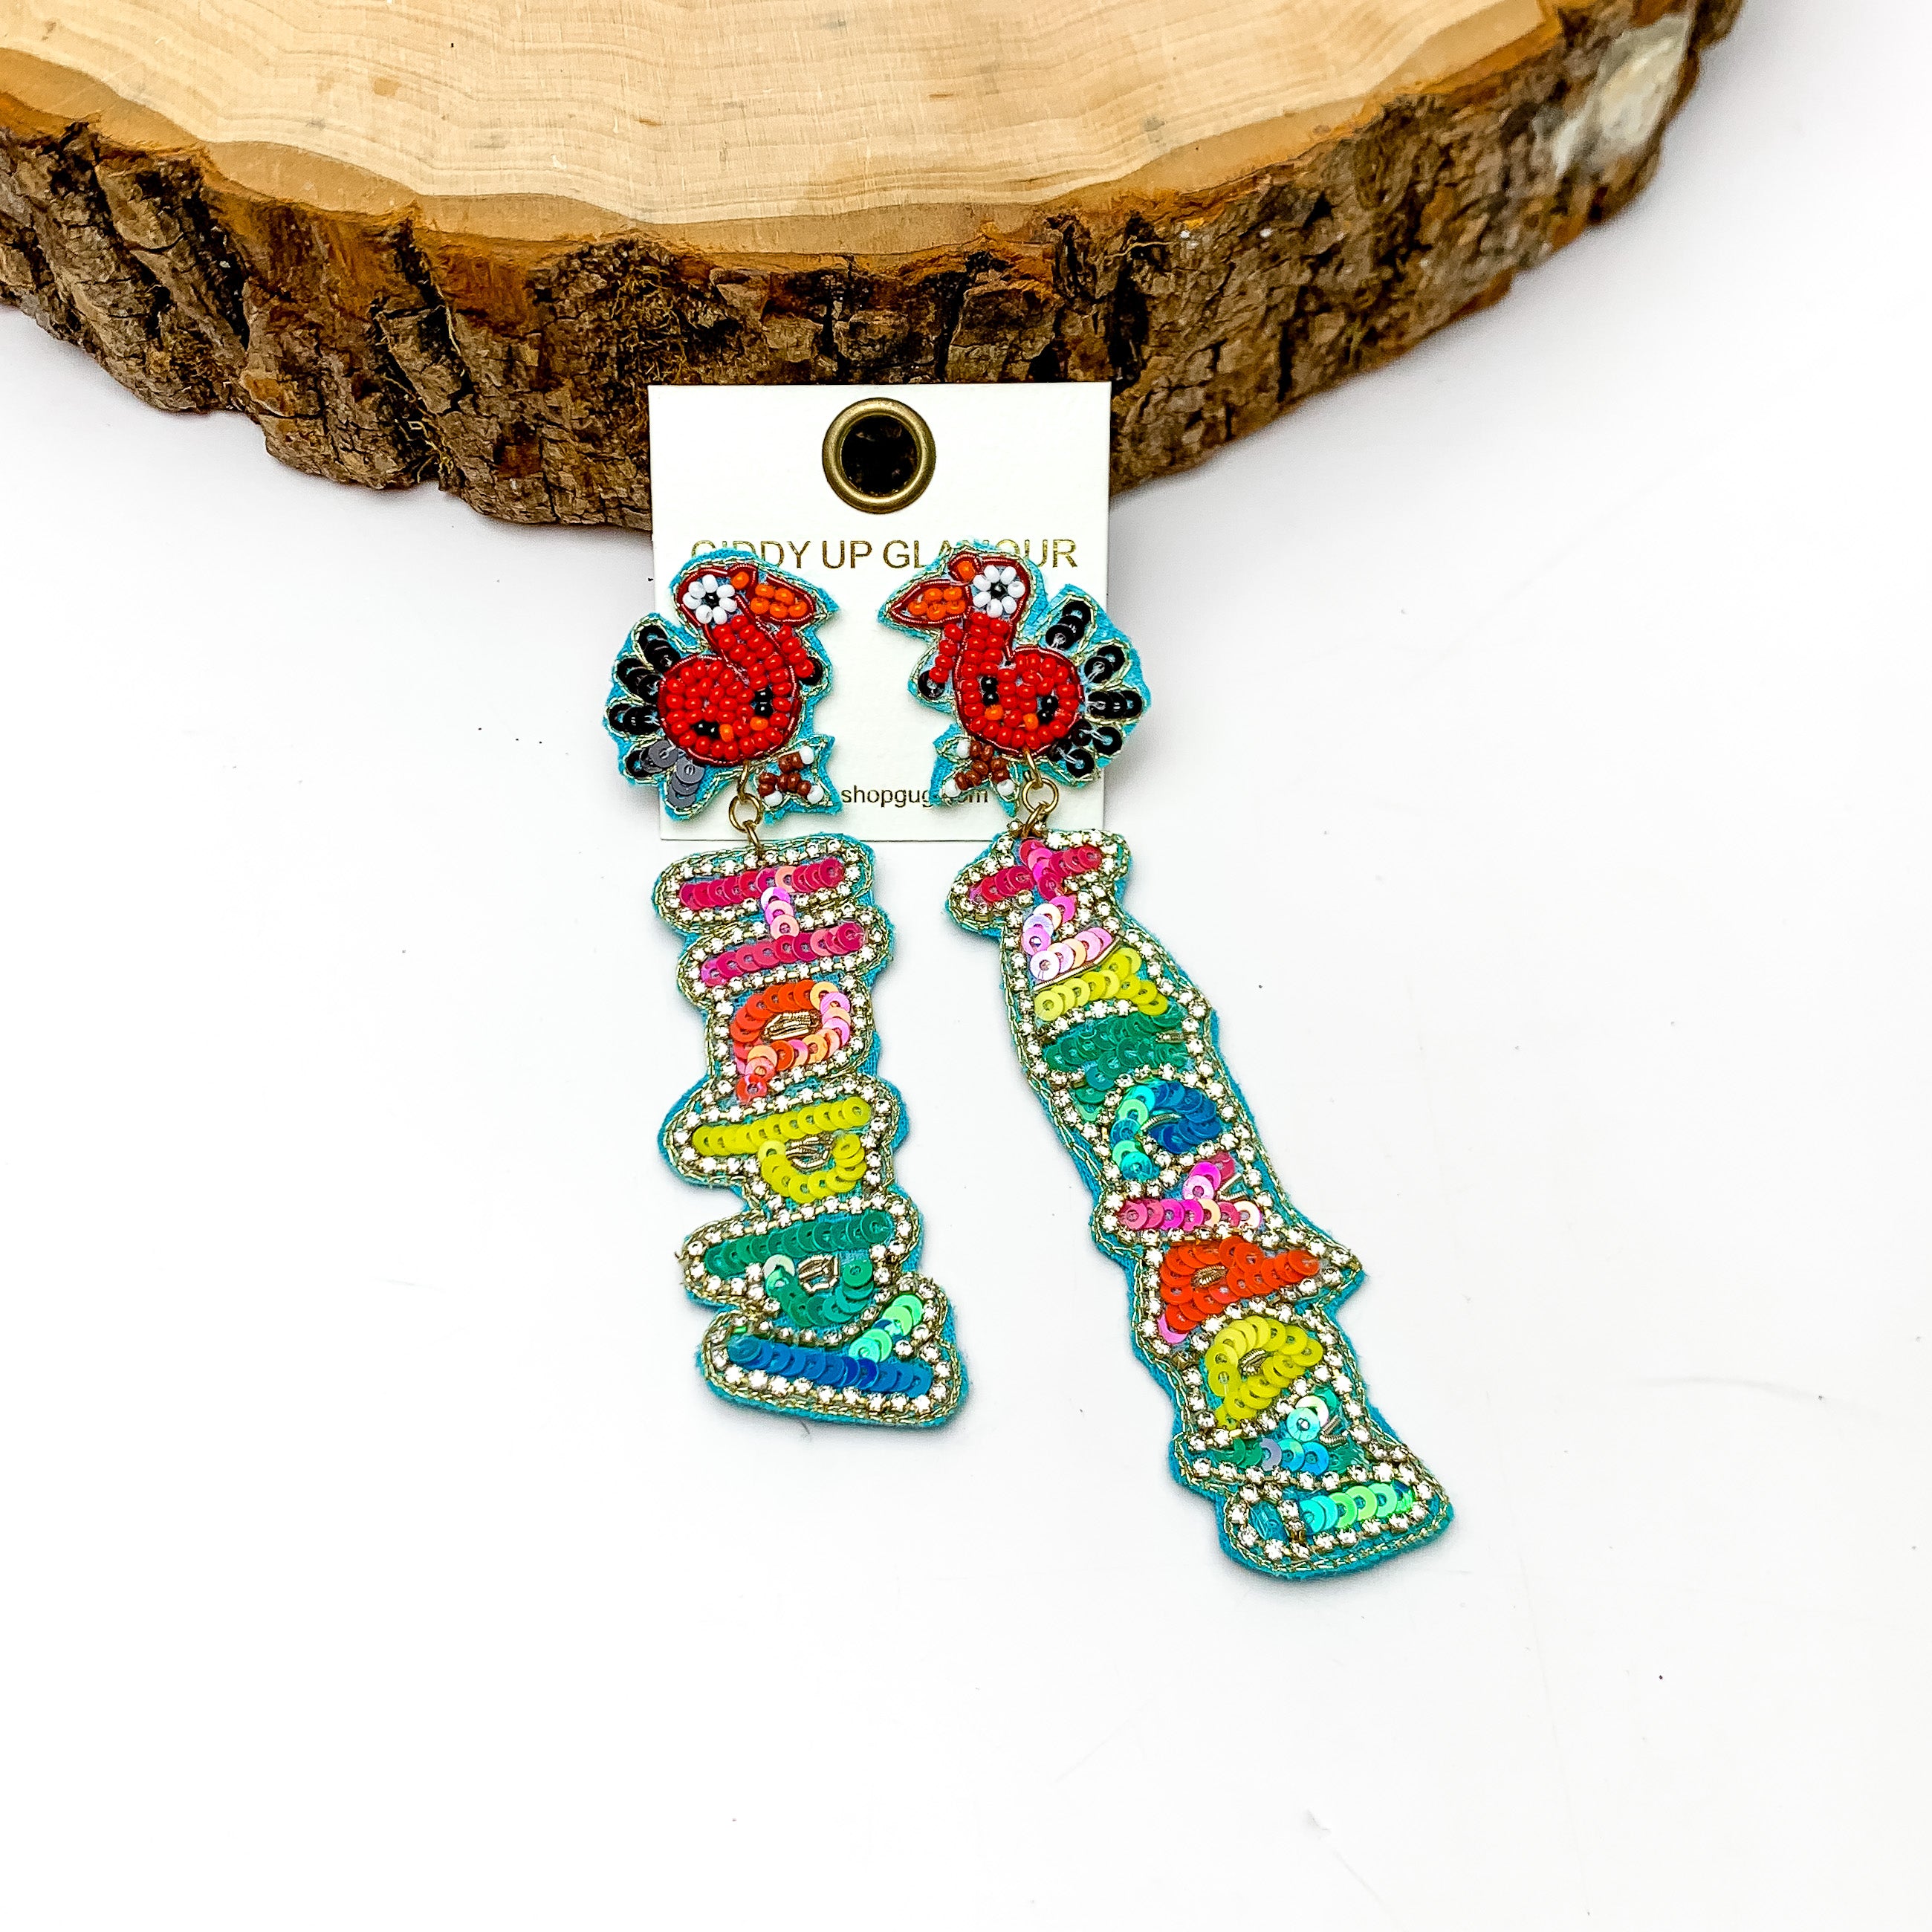 Happy Turkey Day Beaded Earrings in Multicolor. These beaded colorful earrings spell out happy turkey day. They are laying against a piece of wood on a white background.